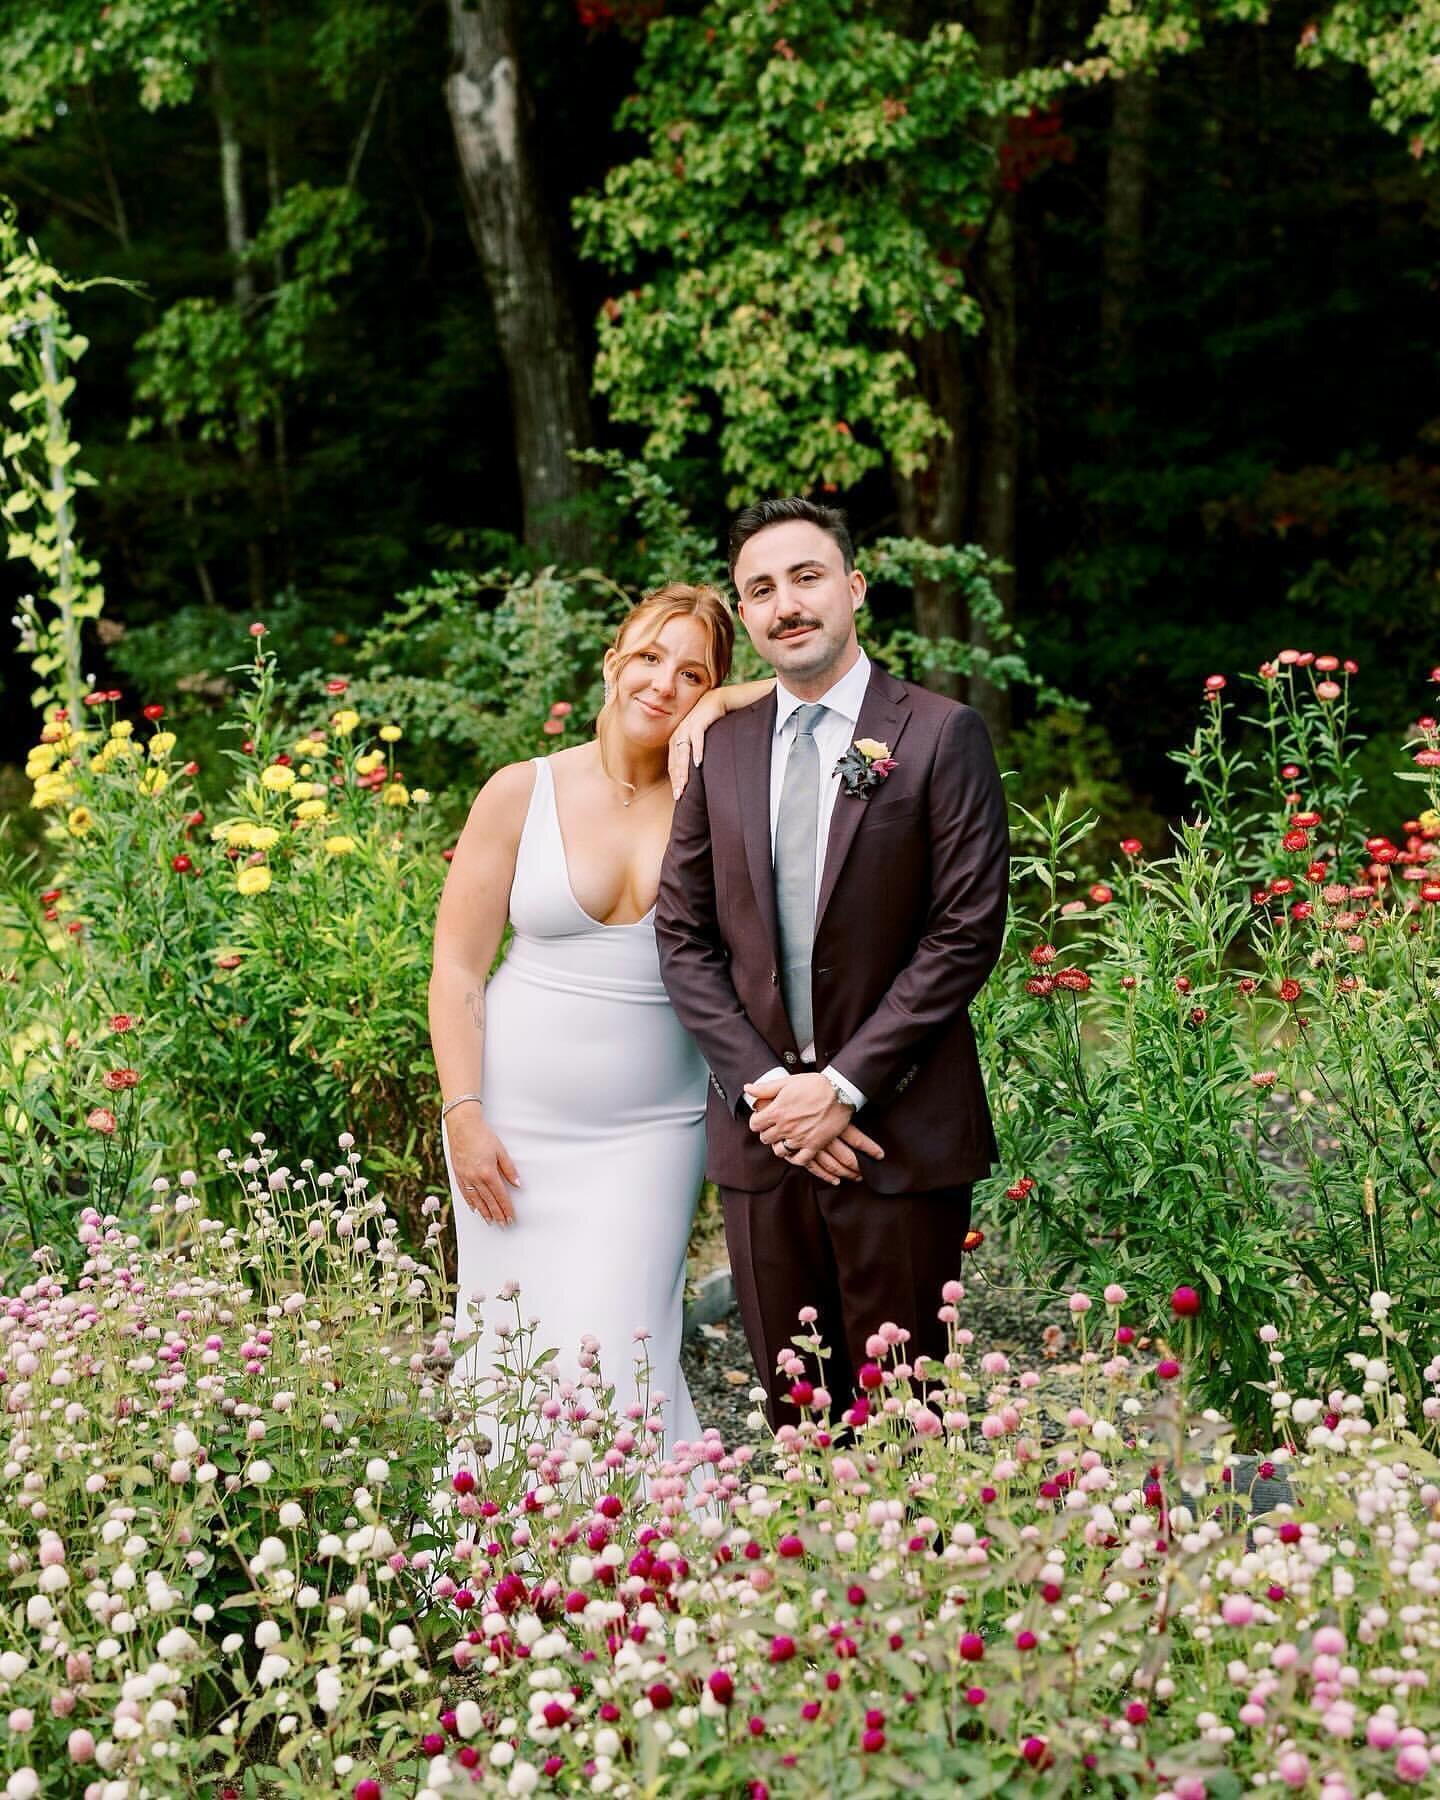 The Flower Garden makes for such beautiful photos! When we first built this garden we weren&rsquo;t sure exactly what it would be used for. Lauren + Garrett found its purpose for sure!
&bull;
📸 @theleightonco